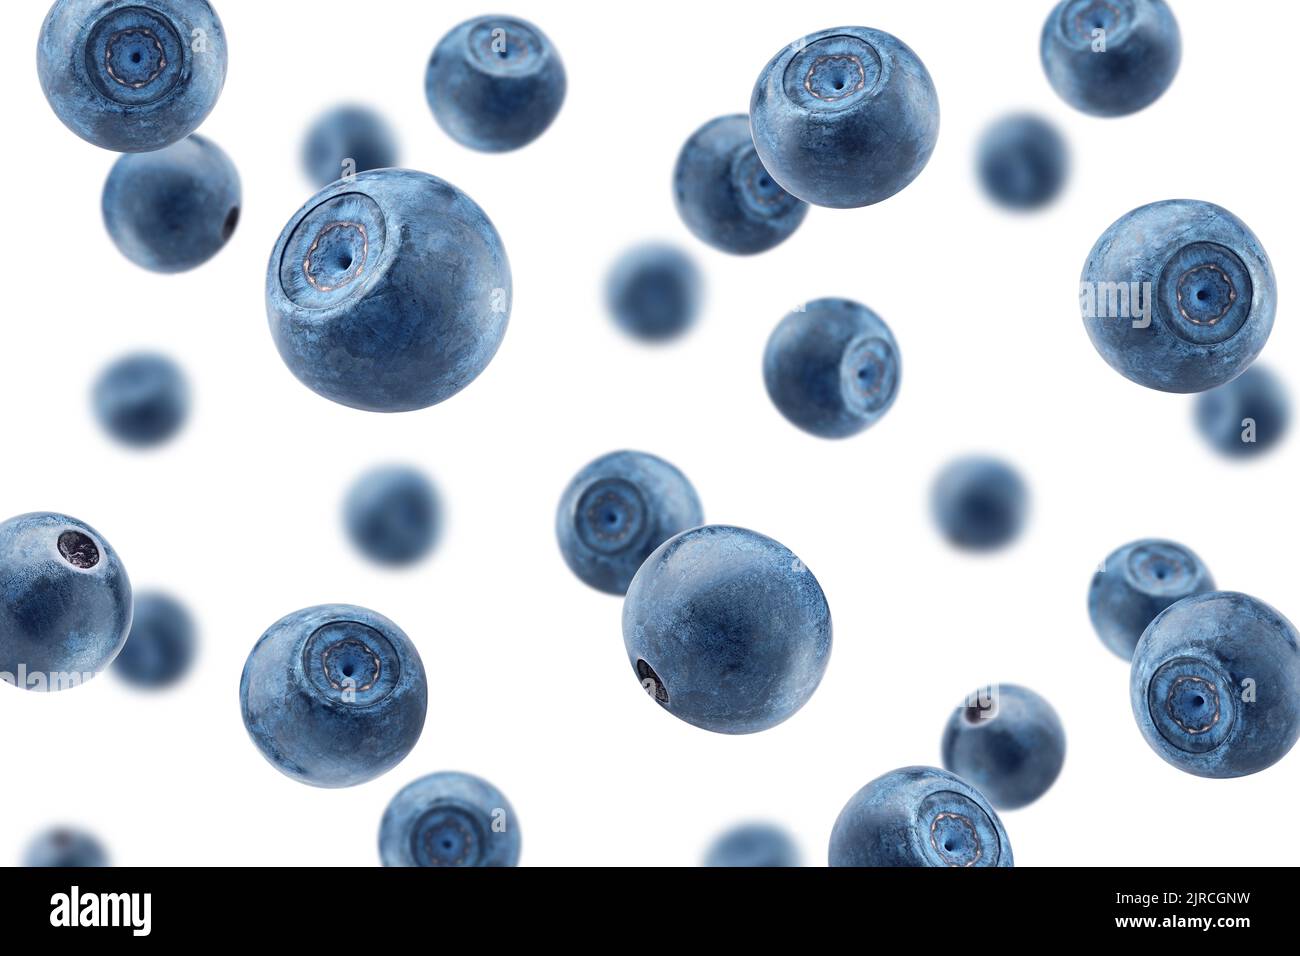 Falling blueberry, isolated on white background, selective focus Stock Photo